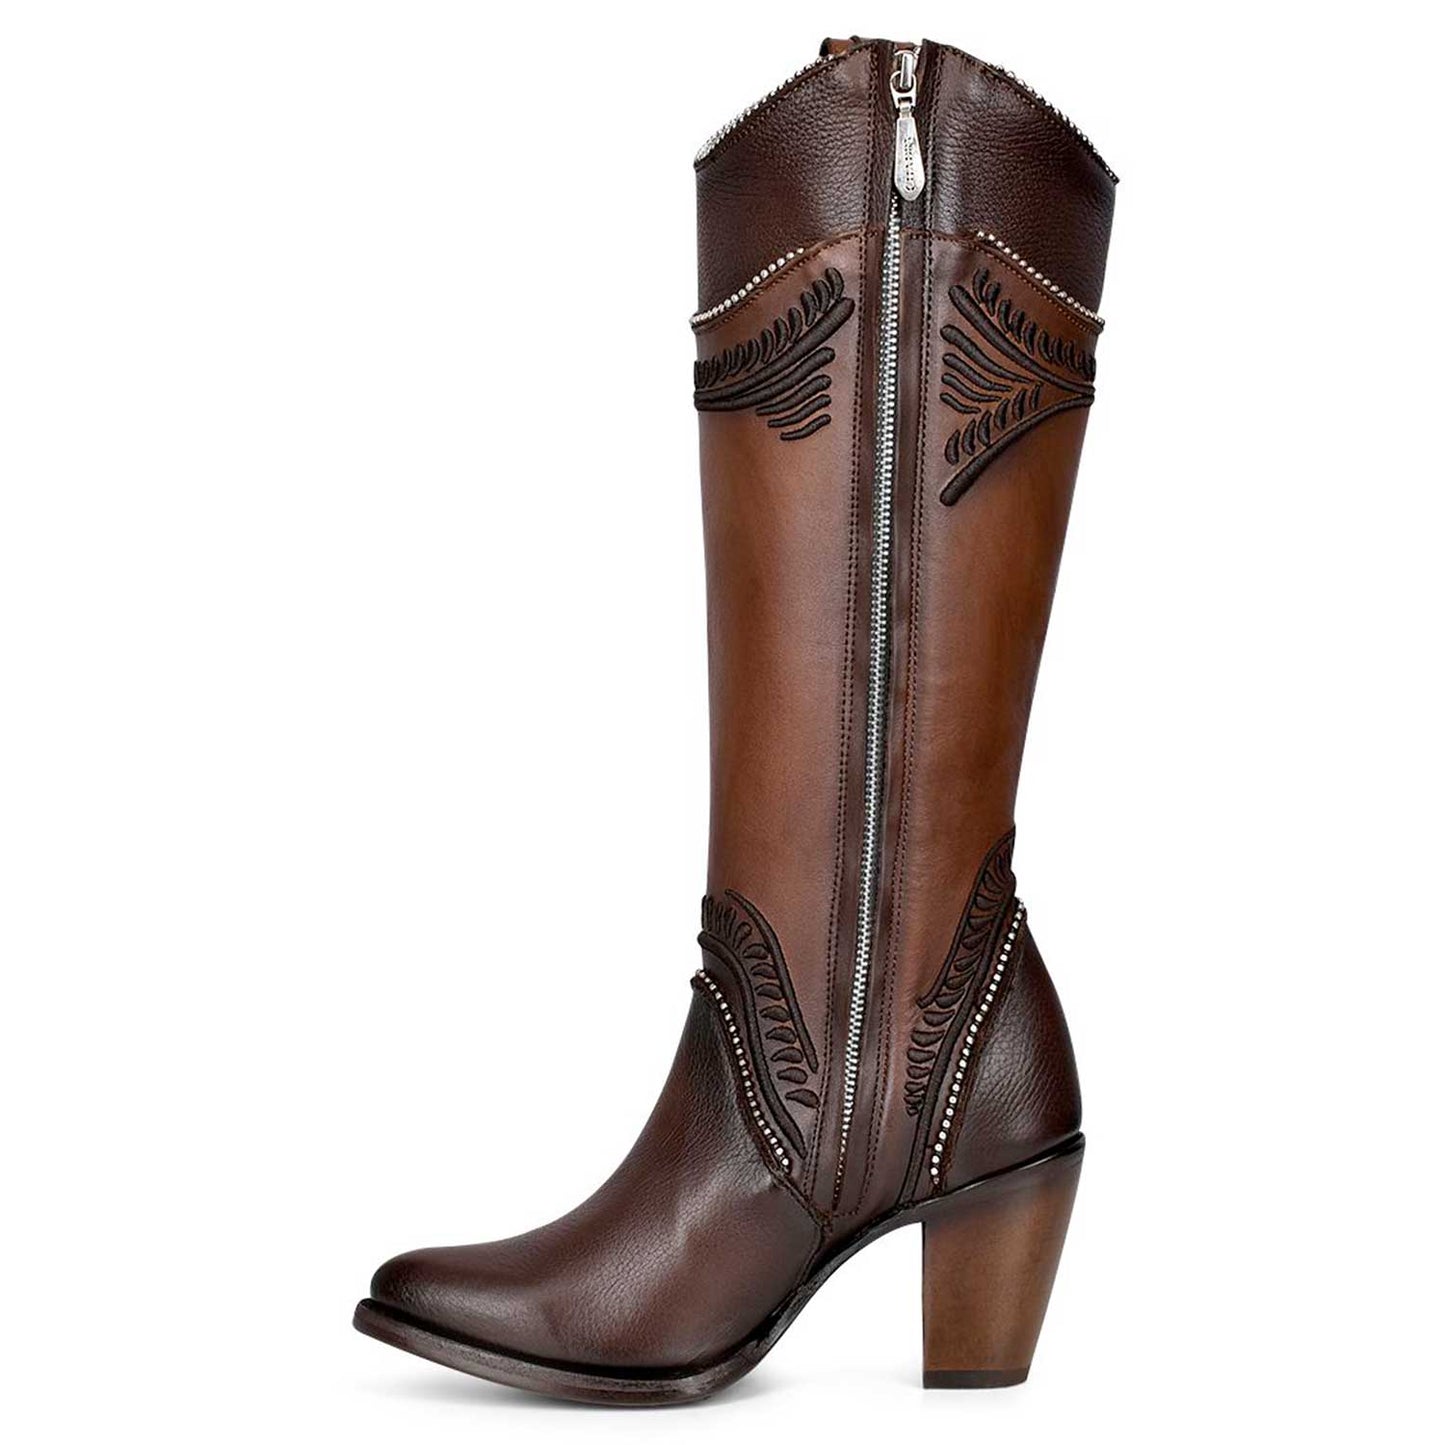 3F82RS - Cuadra brown western cowgirl cowhide leather knee high boots for women-Kuet.us